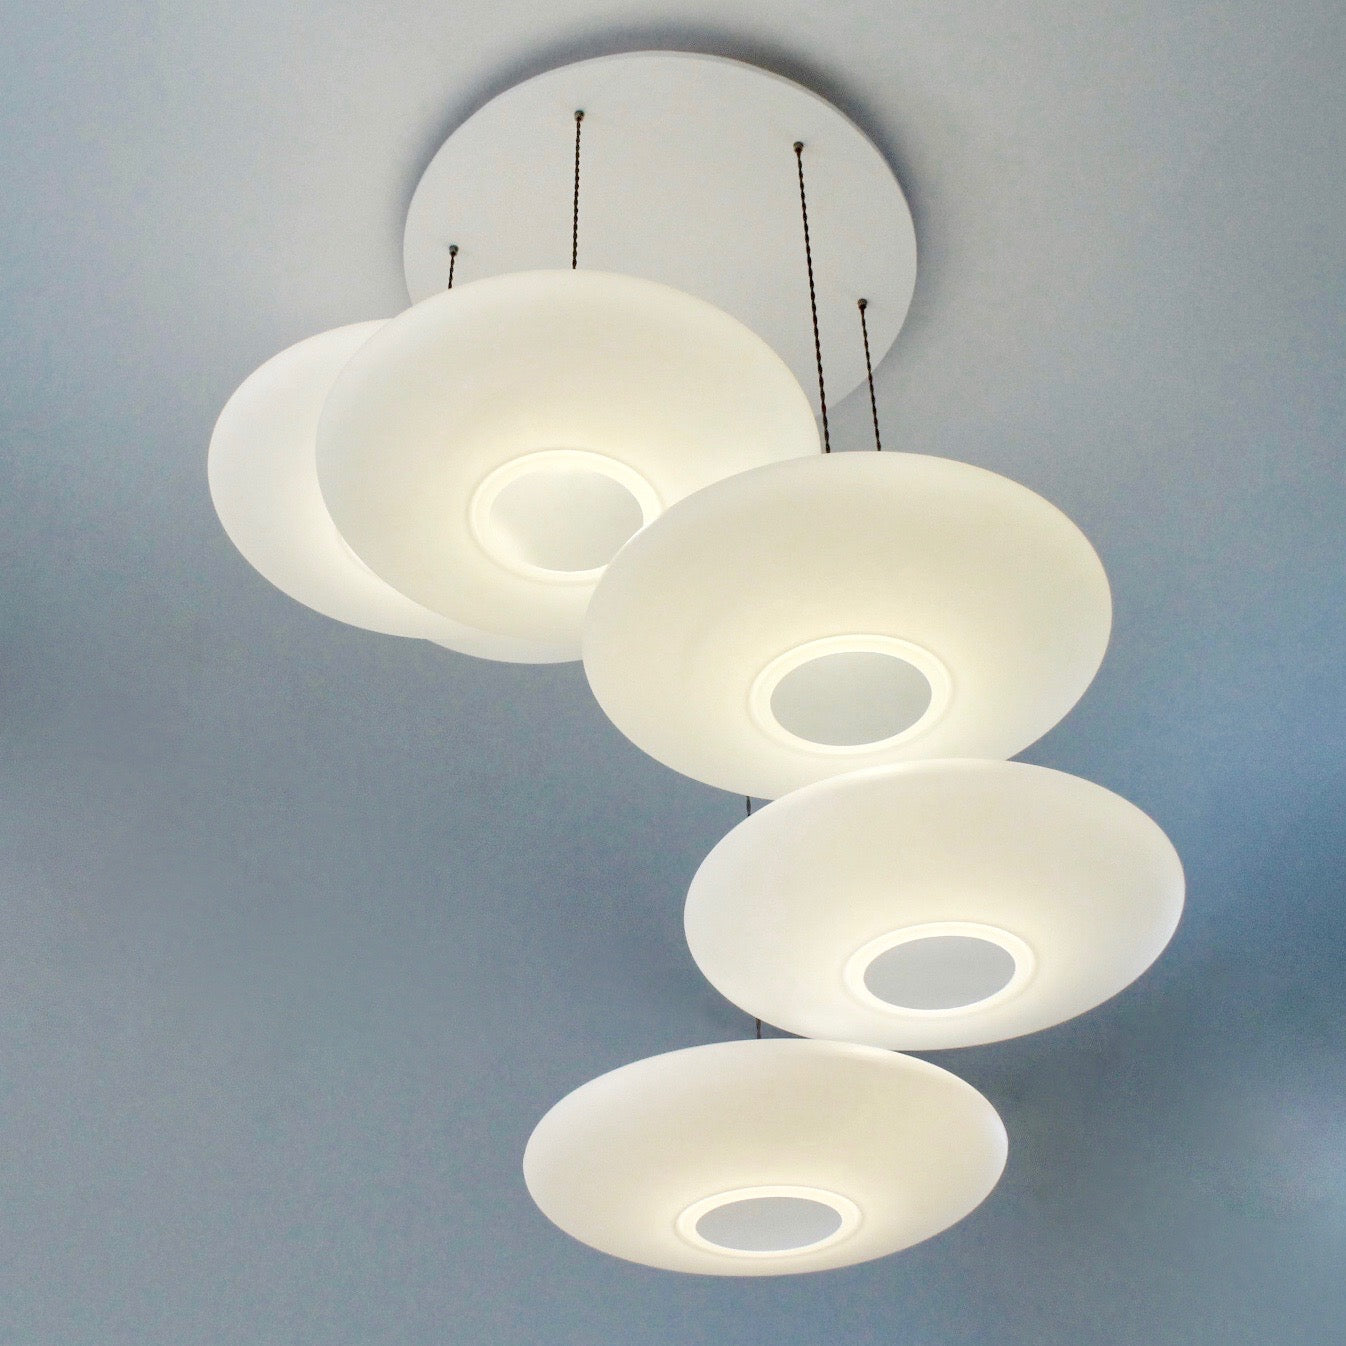 6-Drop Suspension lighting, One Foot Taller, Ethel Inverse, white calm diffuse light, stairwell lighting